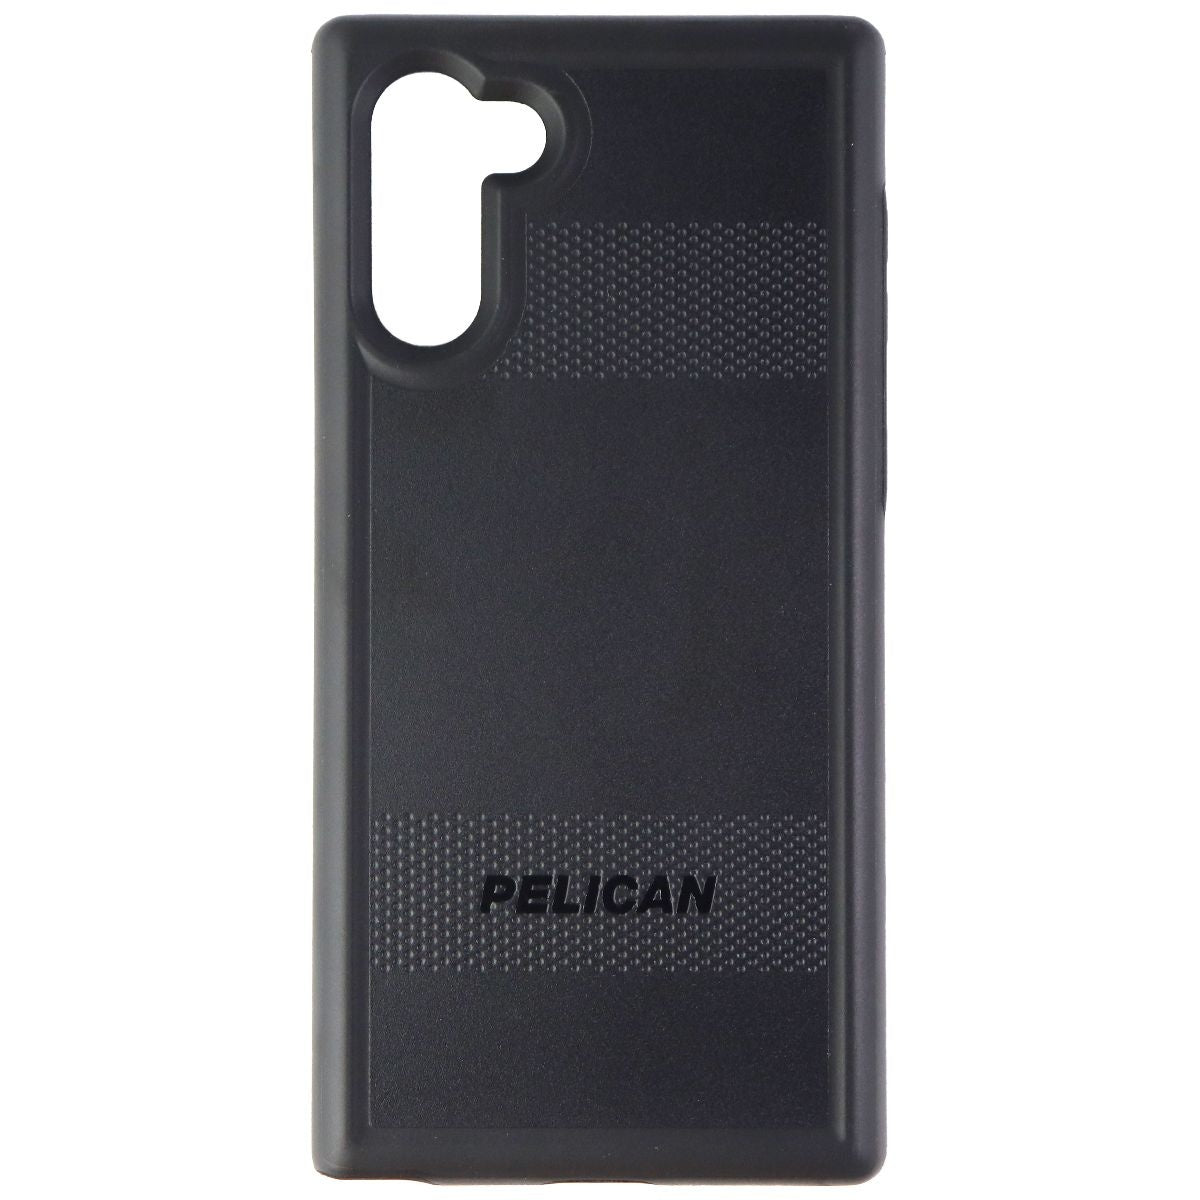 Pelican Protector Series Hard Case for Samsung Galaxy Note10 - Black Cell Phone - Cases, Covers & Skins Pelican    - Simple Cell Bulk Wholesale Pricing - USA Seller